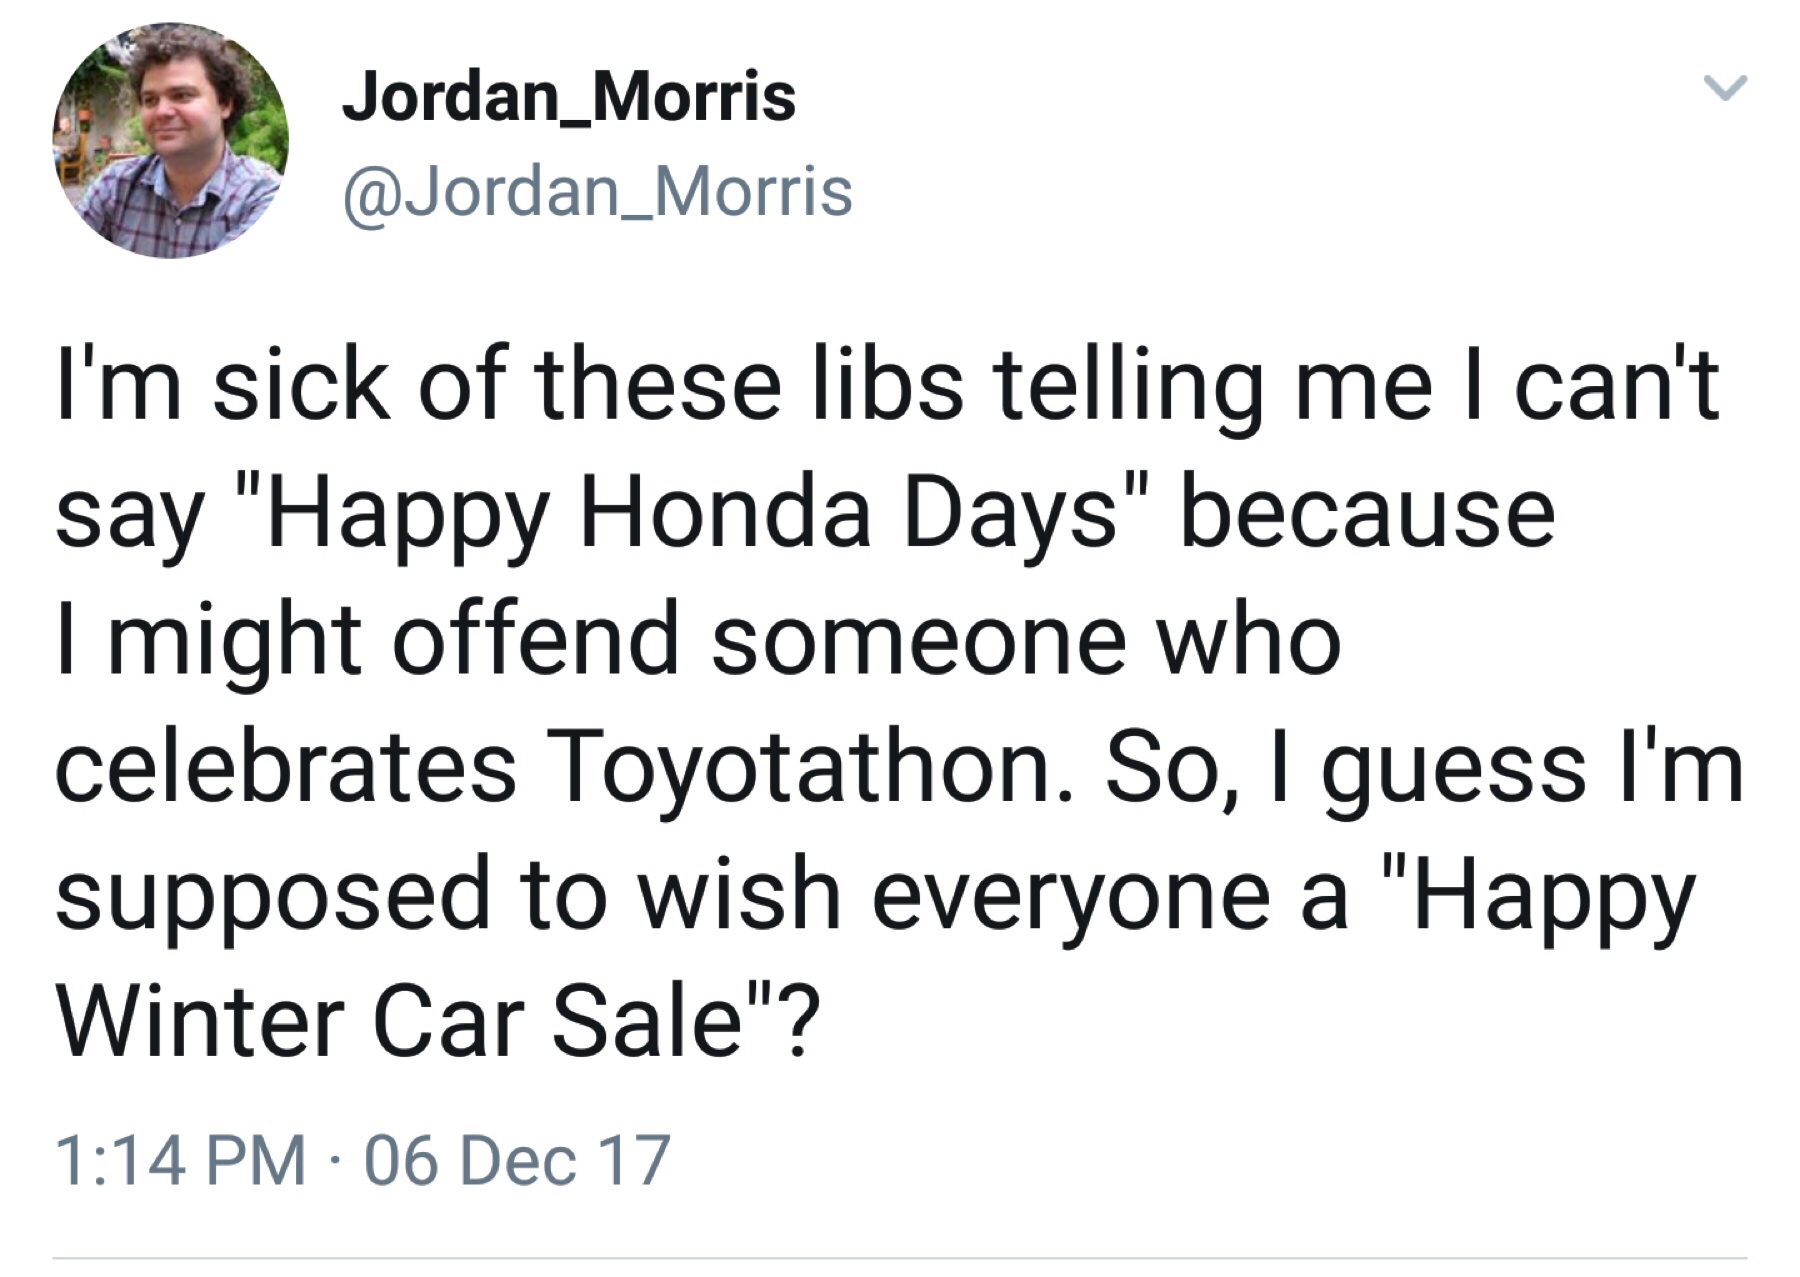 random pics - Jordan_Morris I'm sick of these libs telling me I can't say "Happy Honda Days" because I might offend someone who celebrates Toyotathon. So, I guess I'm supposed to wish everyone a "Happy Winter Car Sale"? 06 Dec 17